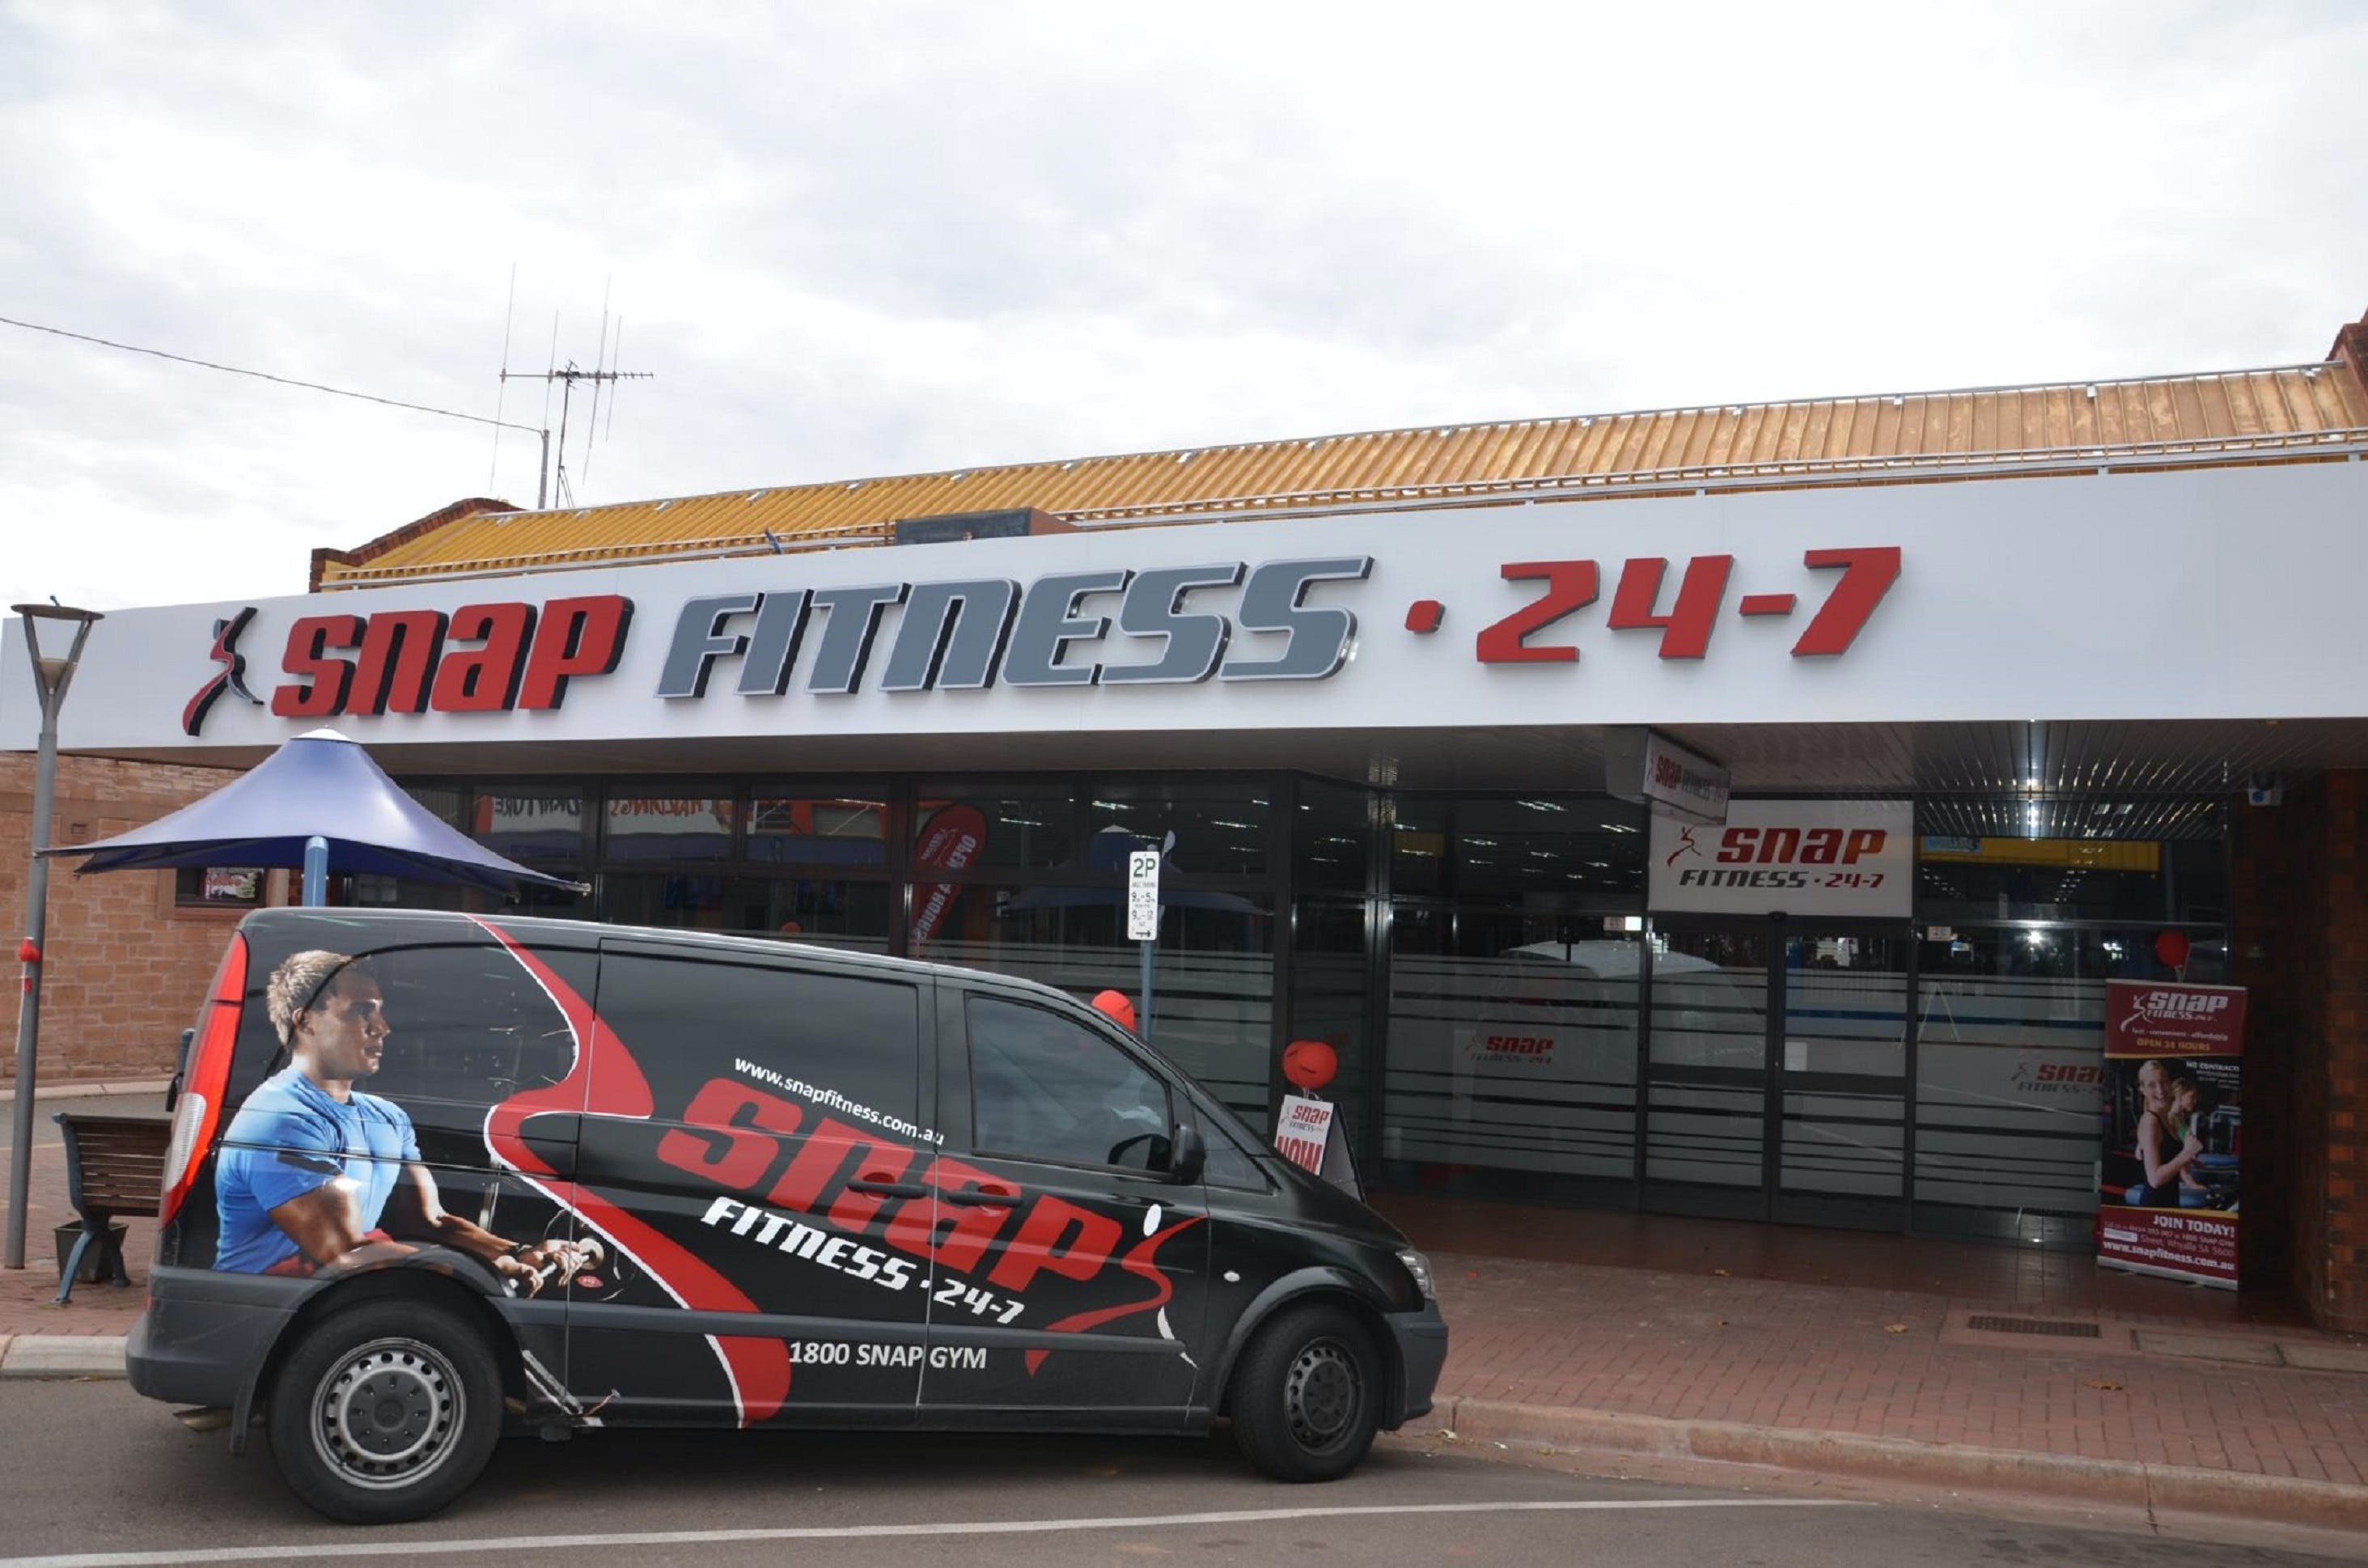 Snap Fitness Whyalla 24/7 gym - Accommodation Mount Tamborine